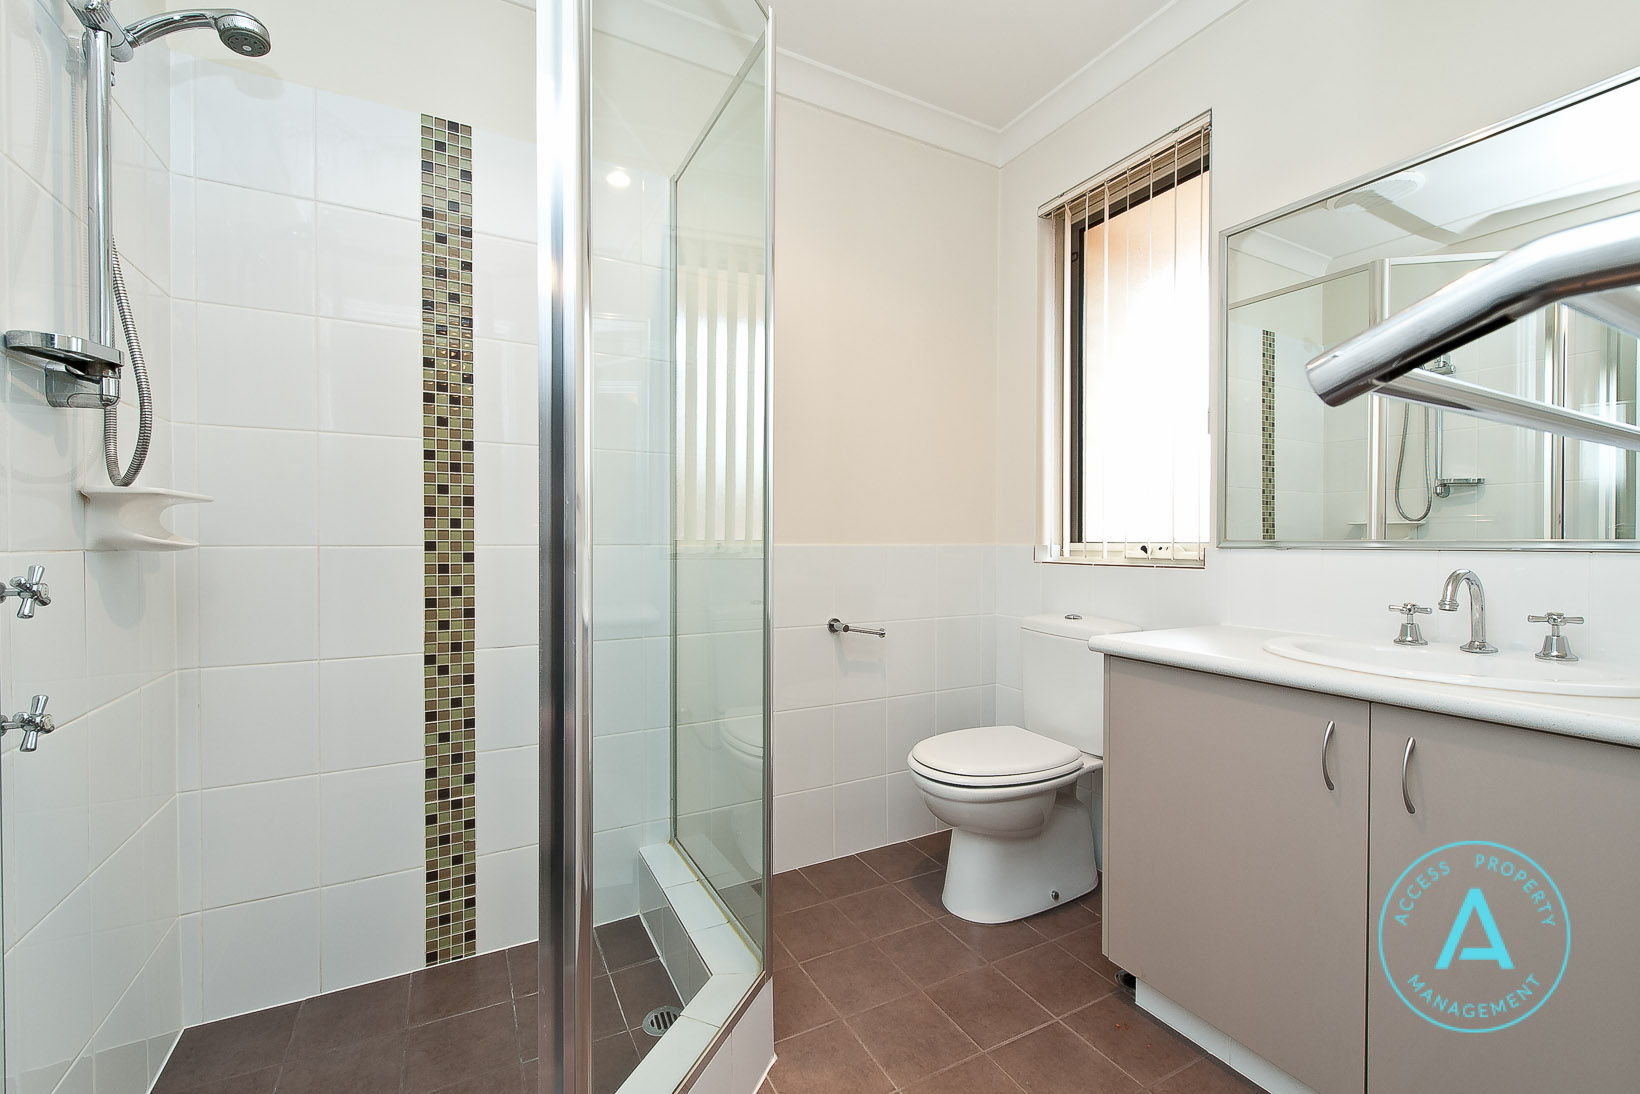 Access Property Management 7/8 Forster Avenue Bathroom